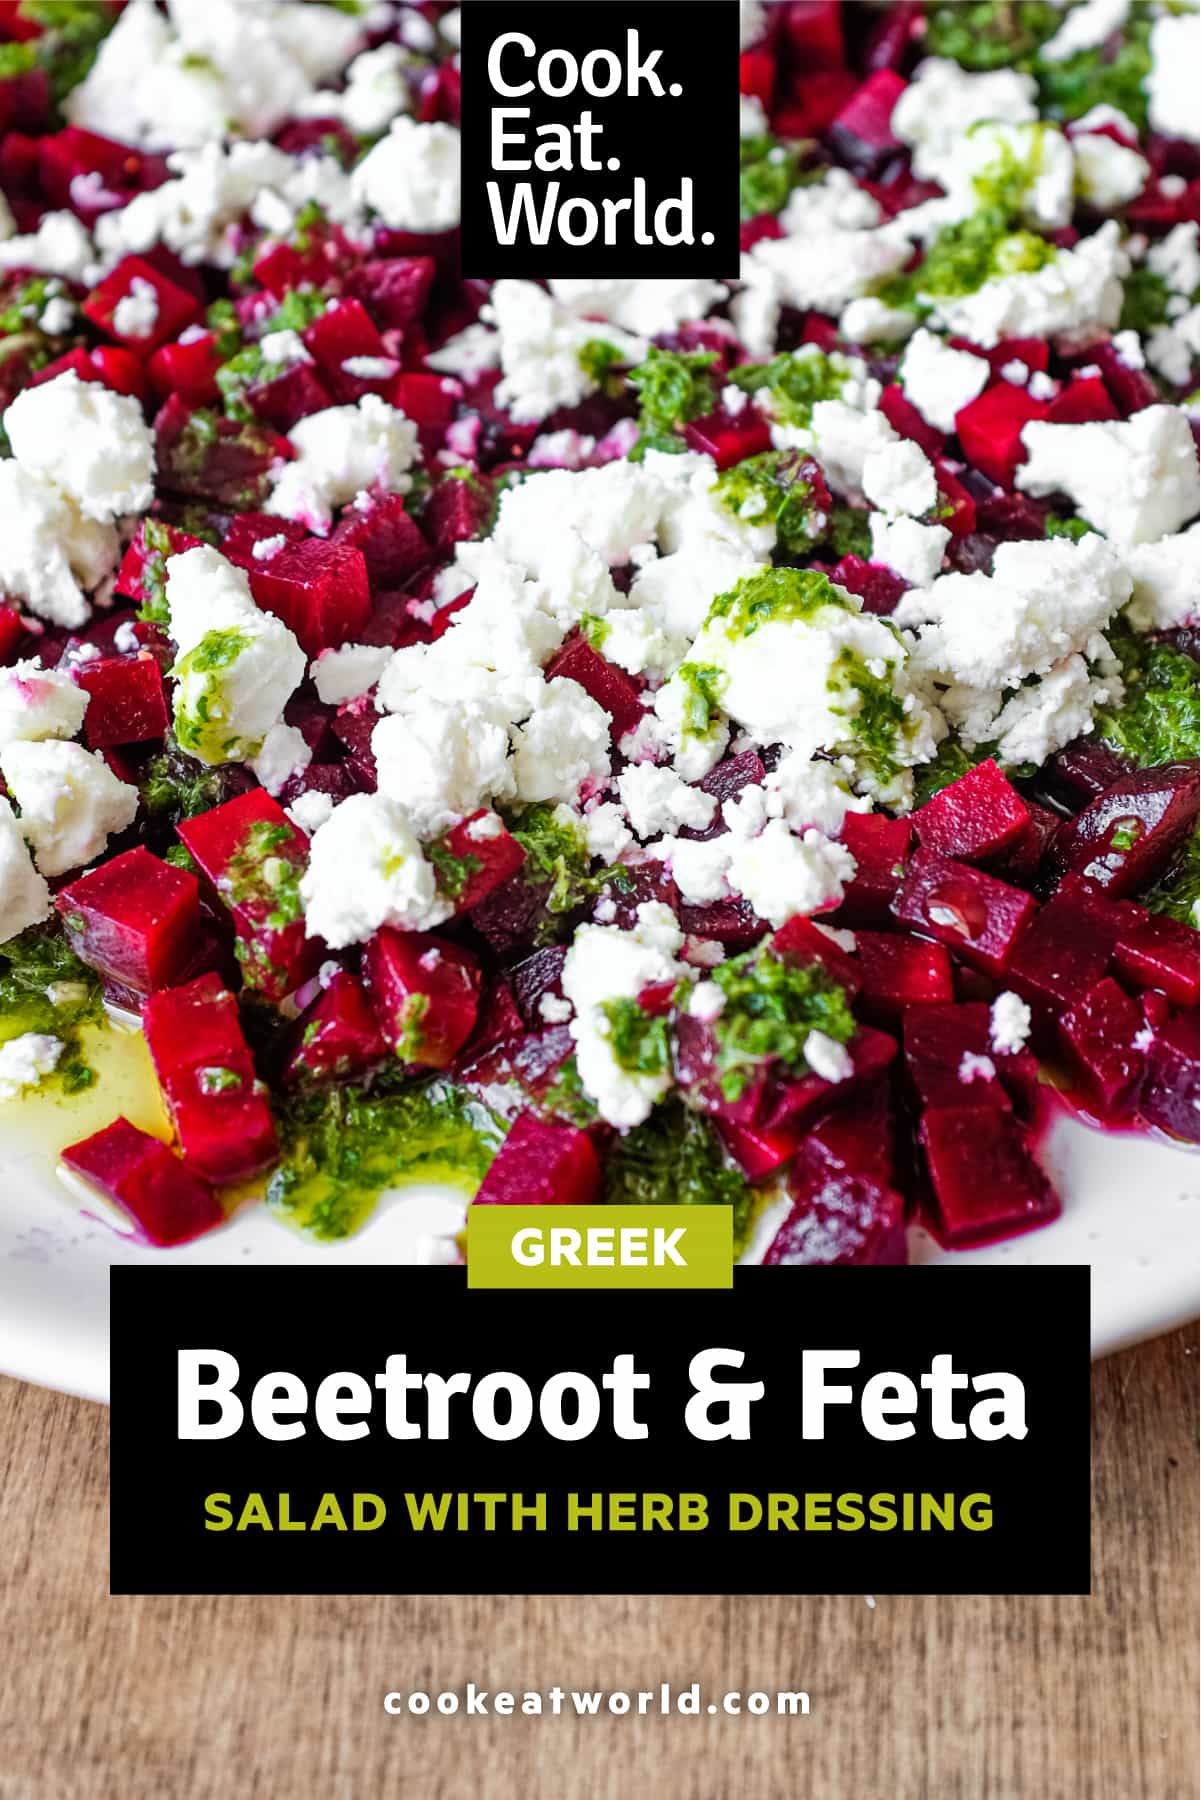 A platter of beetroot & feta salad with a herb dressing